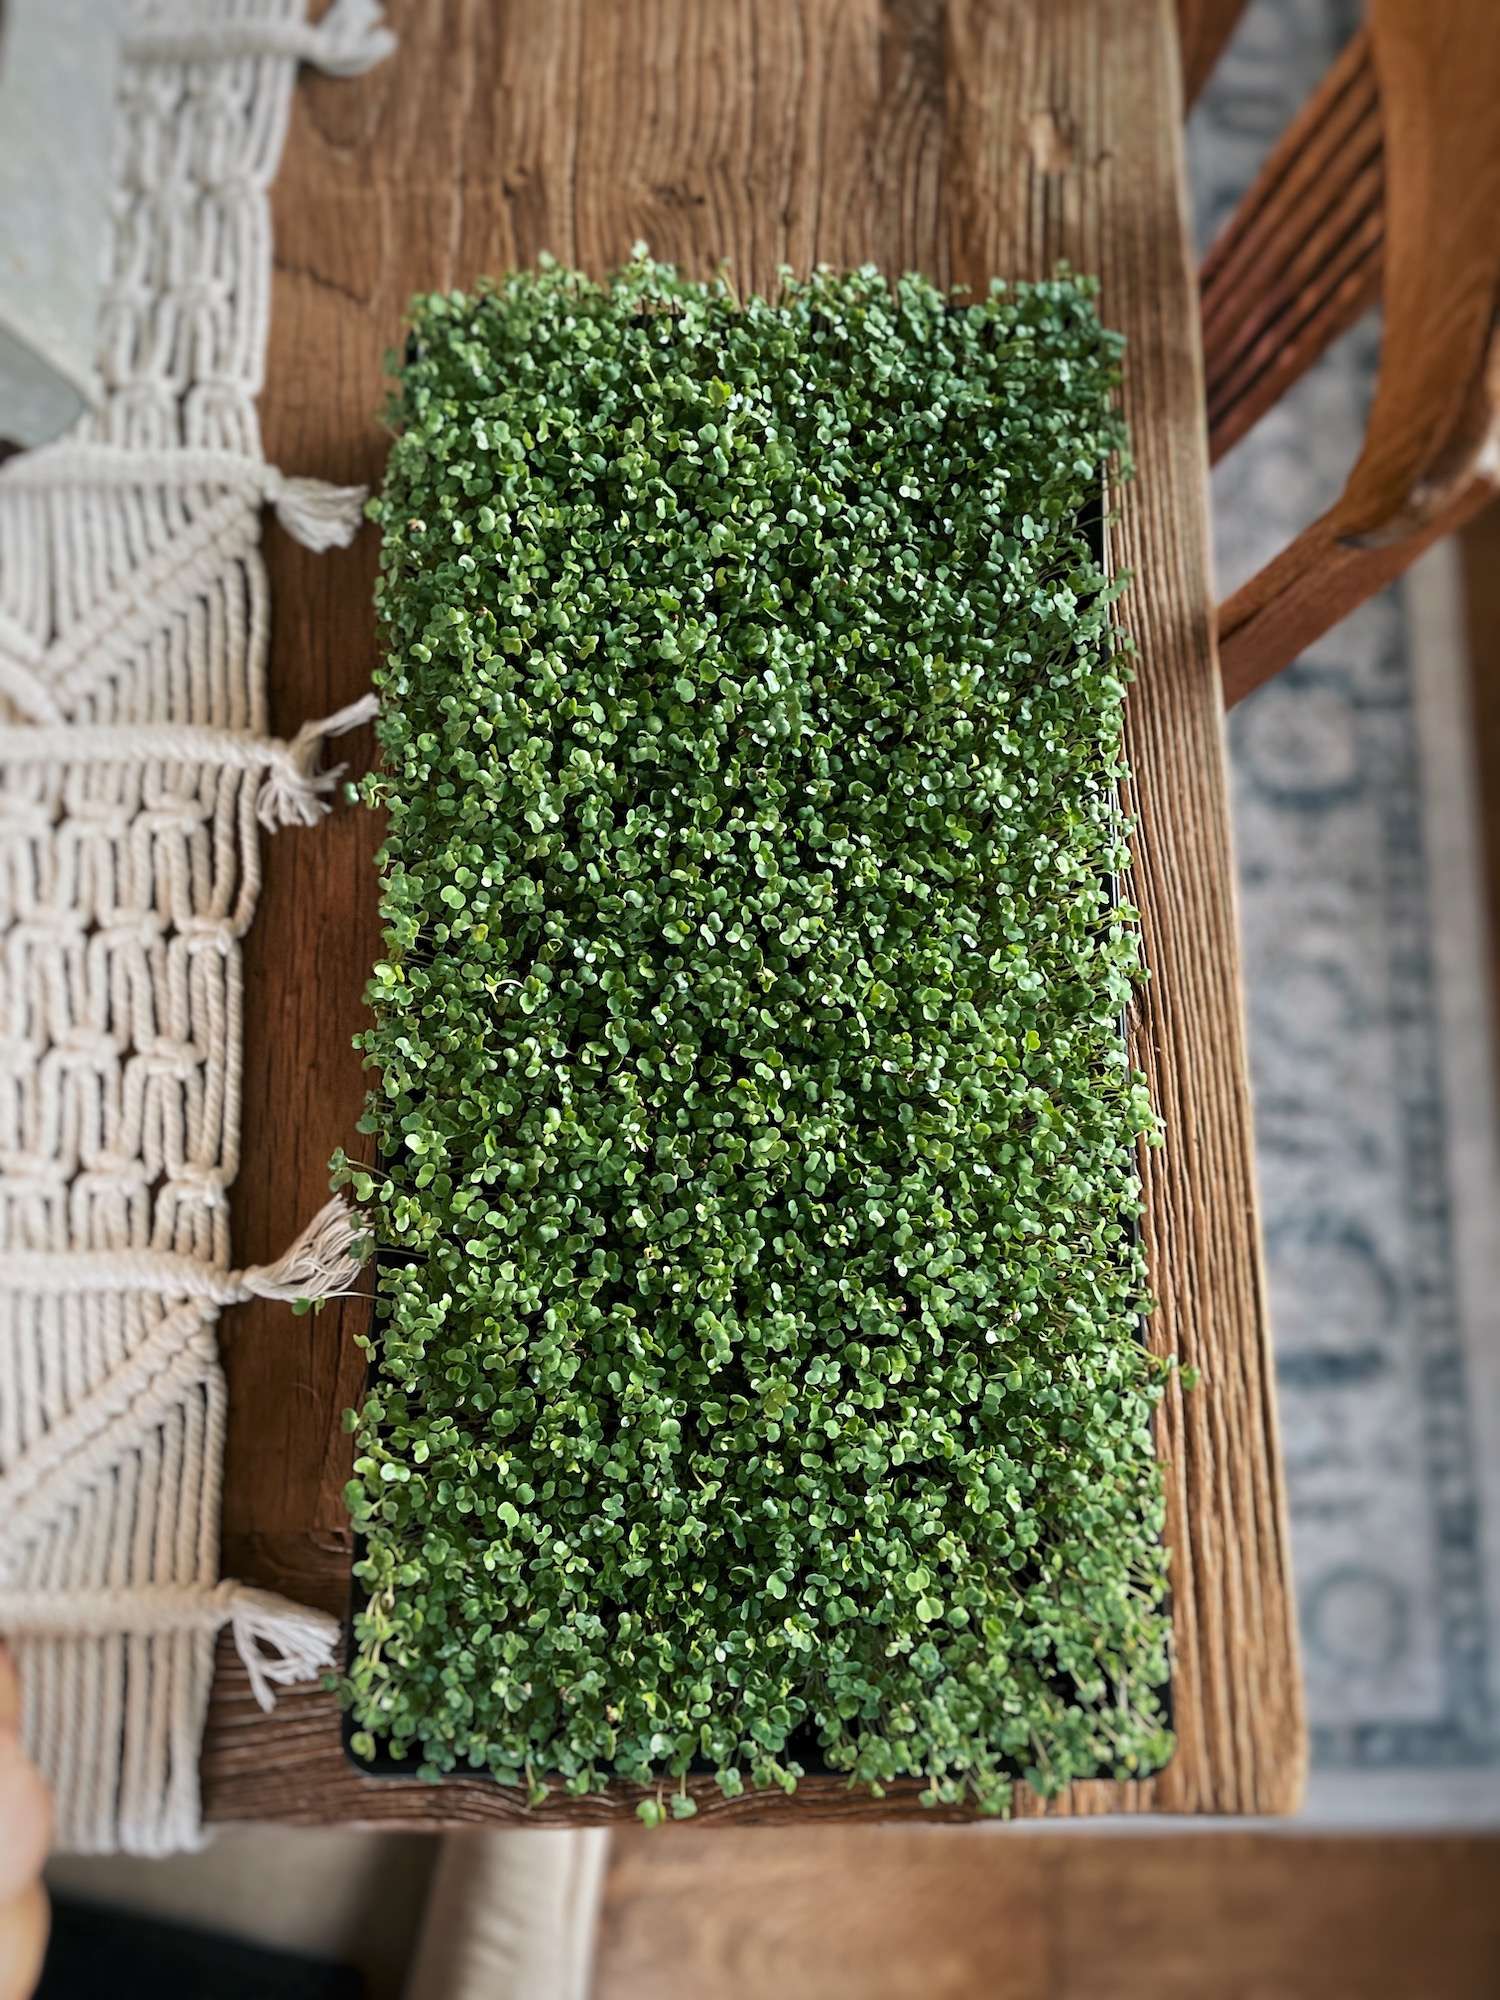 A 1020 tray full of broccoli microgreens sitting on a wooden table